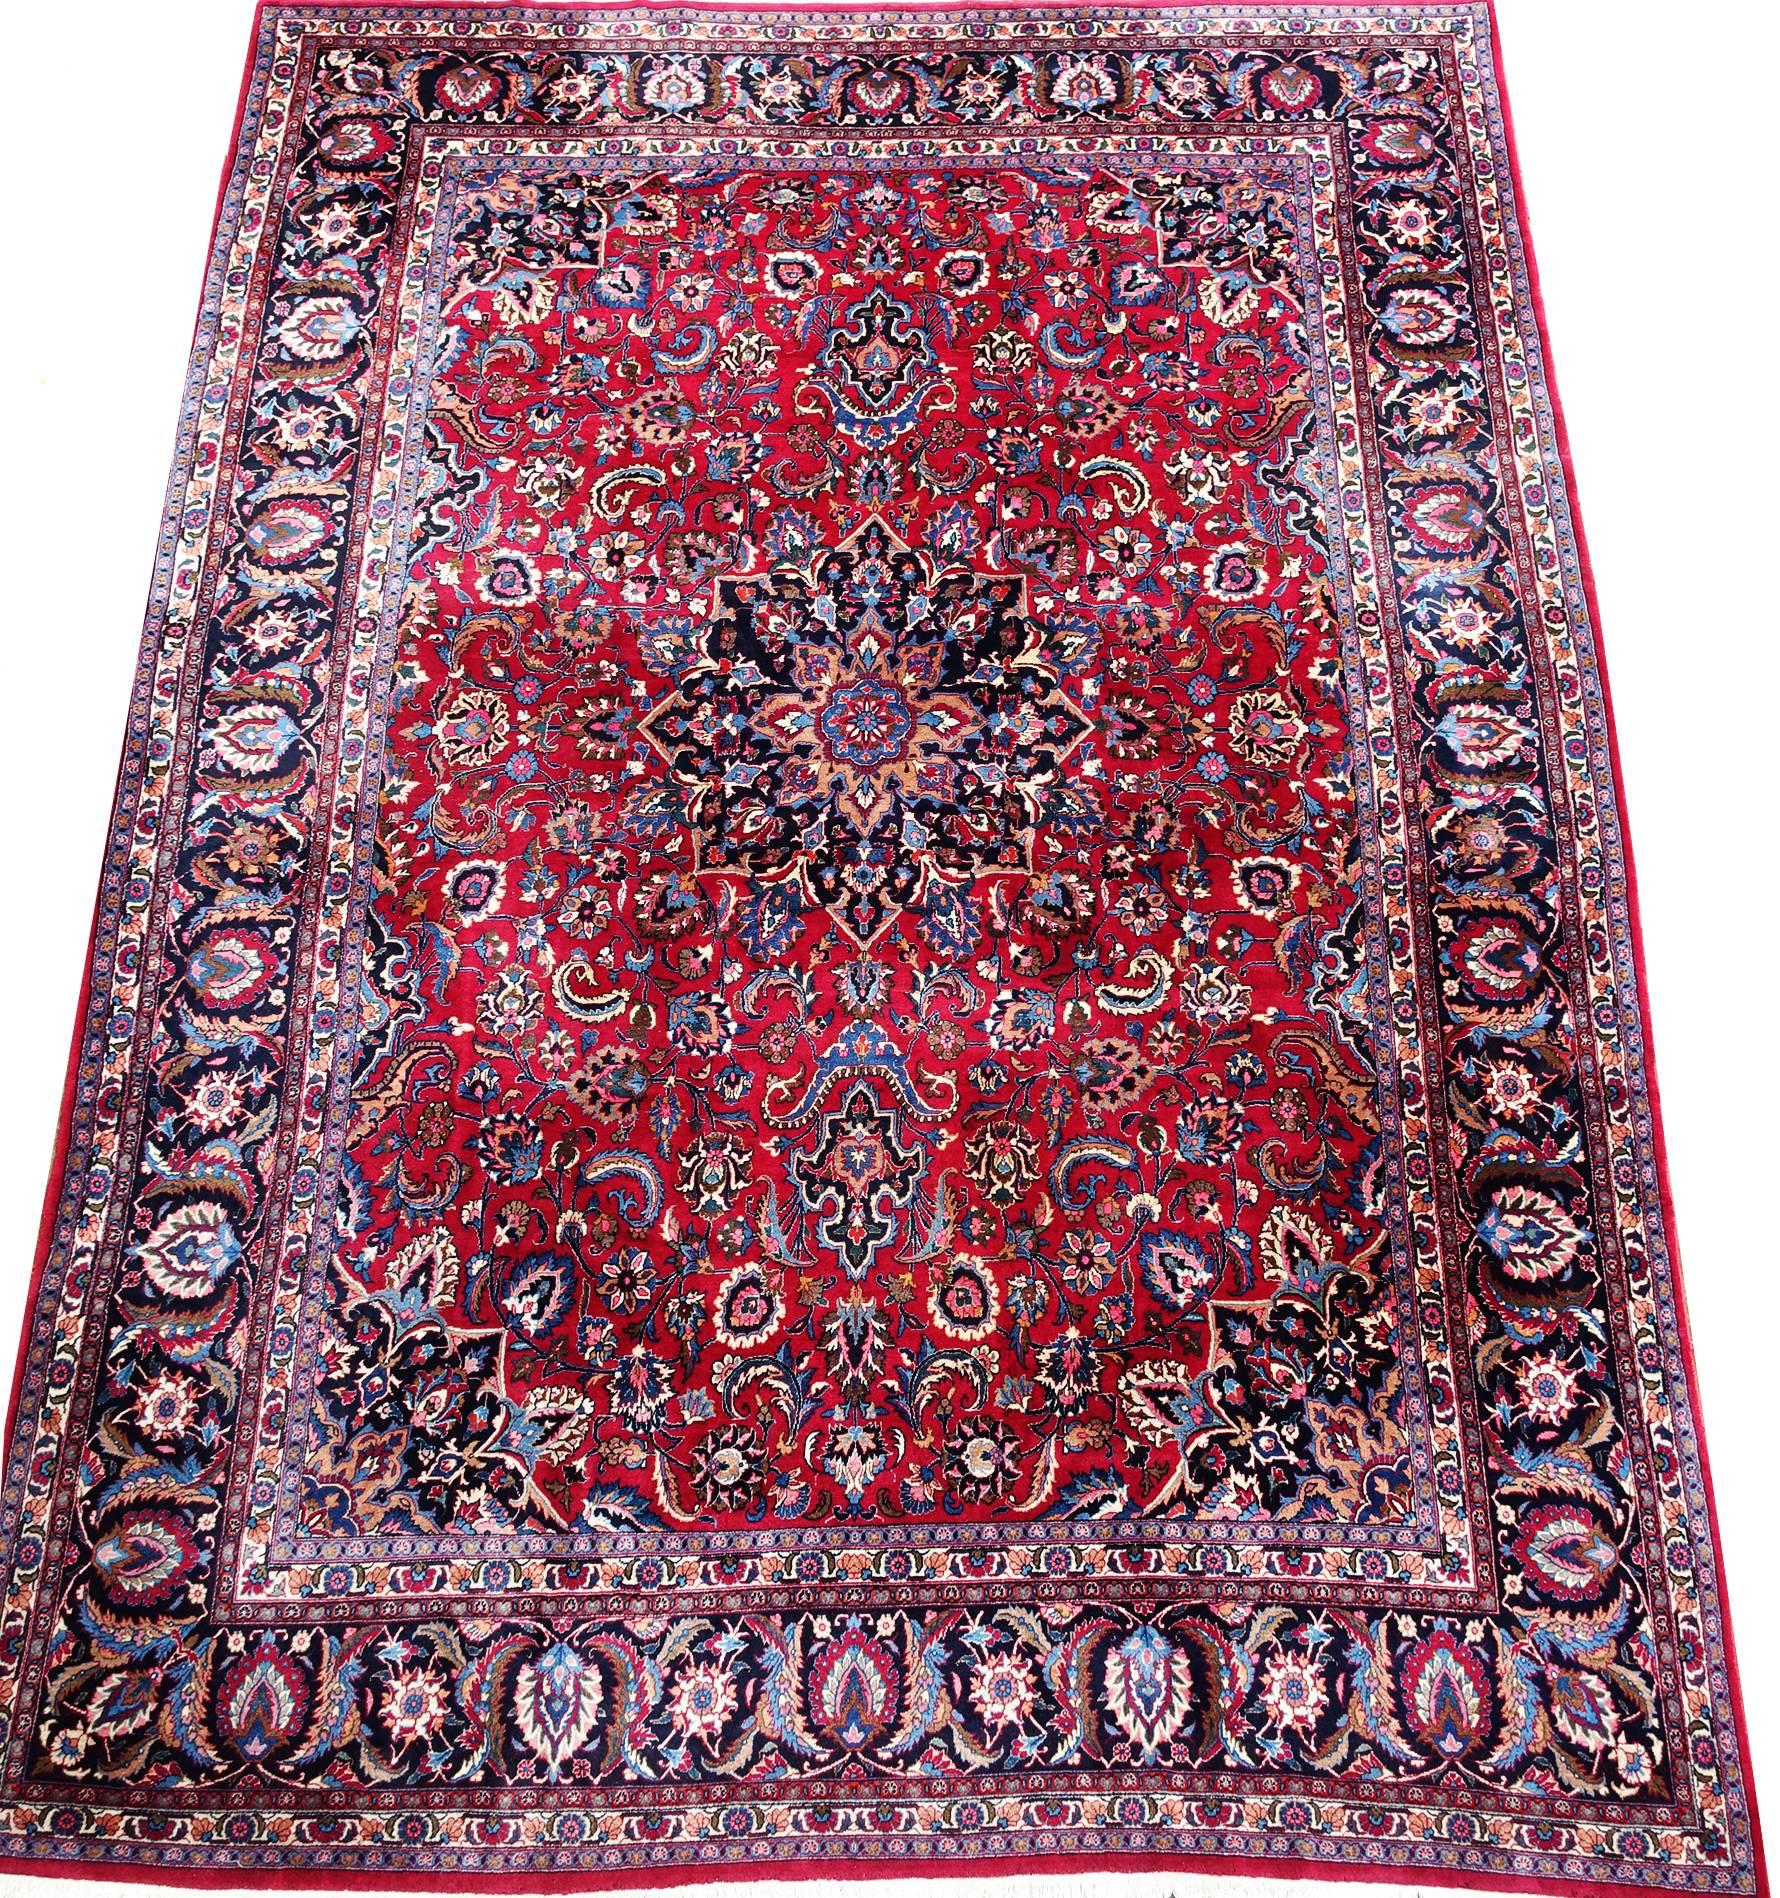 Authentic oversize Persian Khorasan circa 1970s circa 410 x 296cm or 13.0 by 9.6 feet
Material: Wool on cotton
Manufacturing period: 1950-1999
This is an authentic and gorgeous fine 1970s Persian Khorasan 
Description: 
Origin: Iran / Khorasan